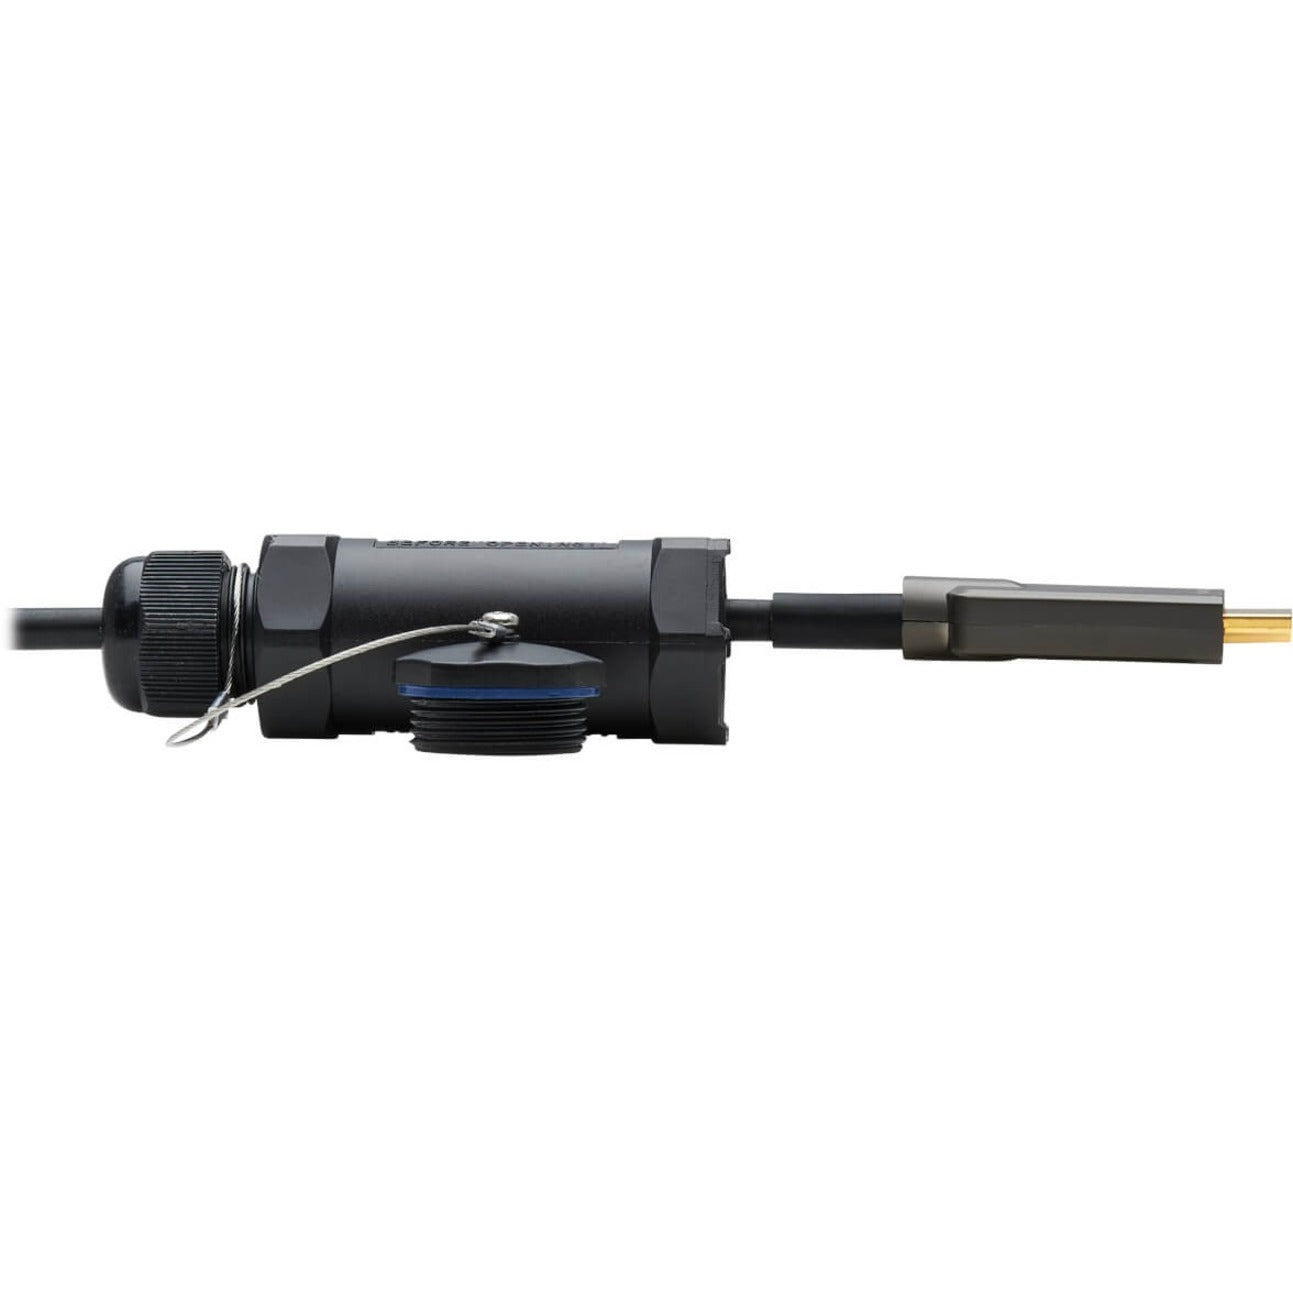 Tripp Lite P568FA-50M-W Fiber Optic Audio/Video Cable, Armored HDMI, 164.04 ft, 18 Gbit/s, 3840 x 2160, Gold Plated